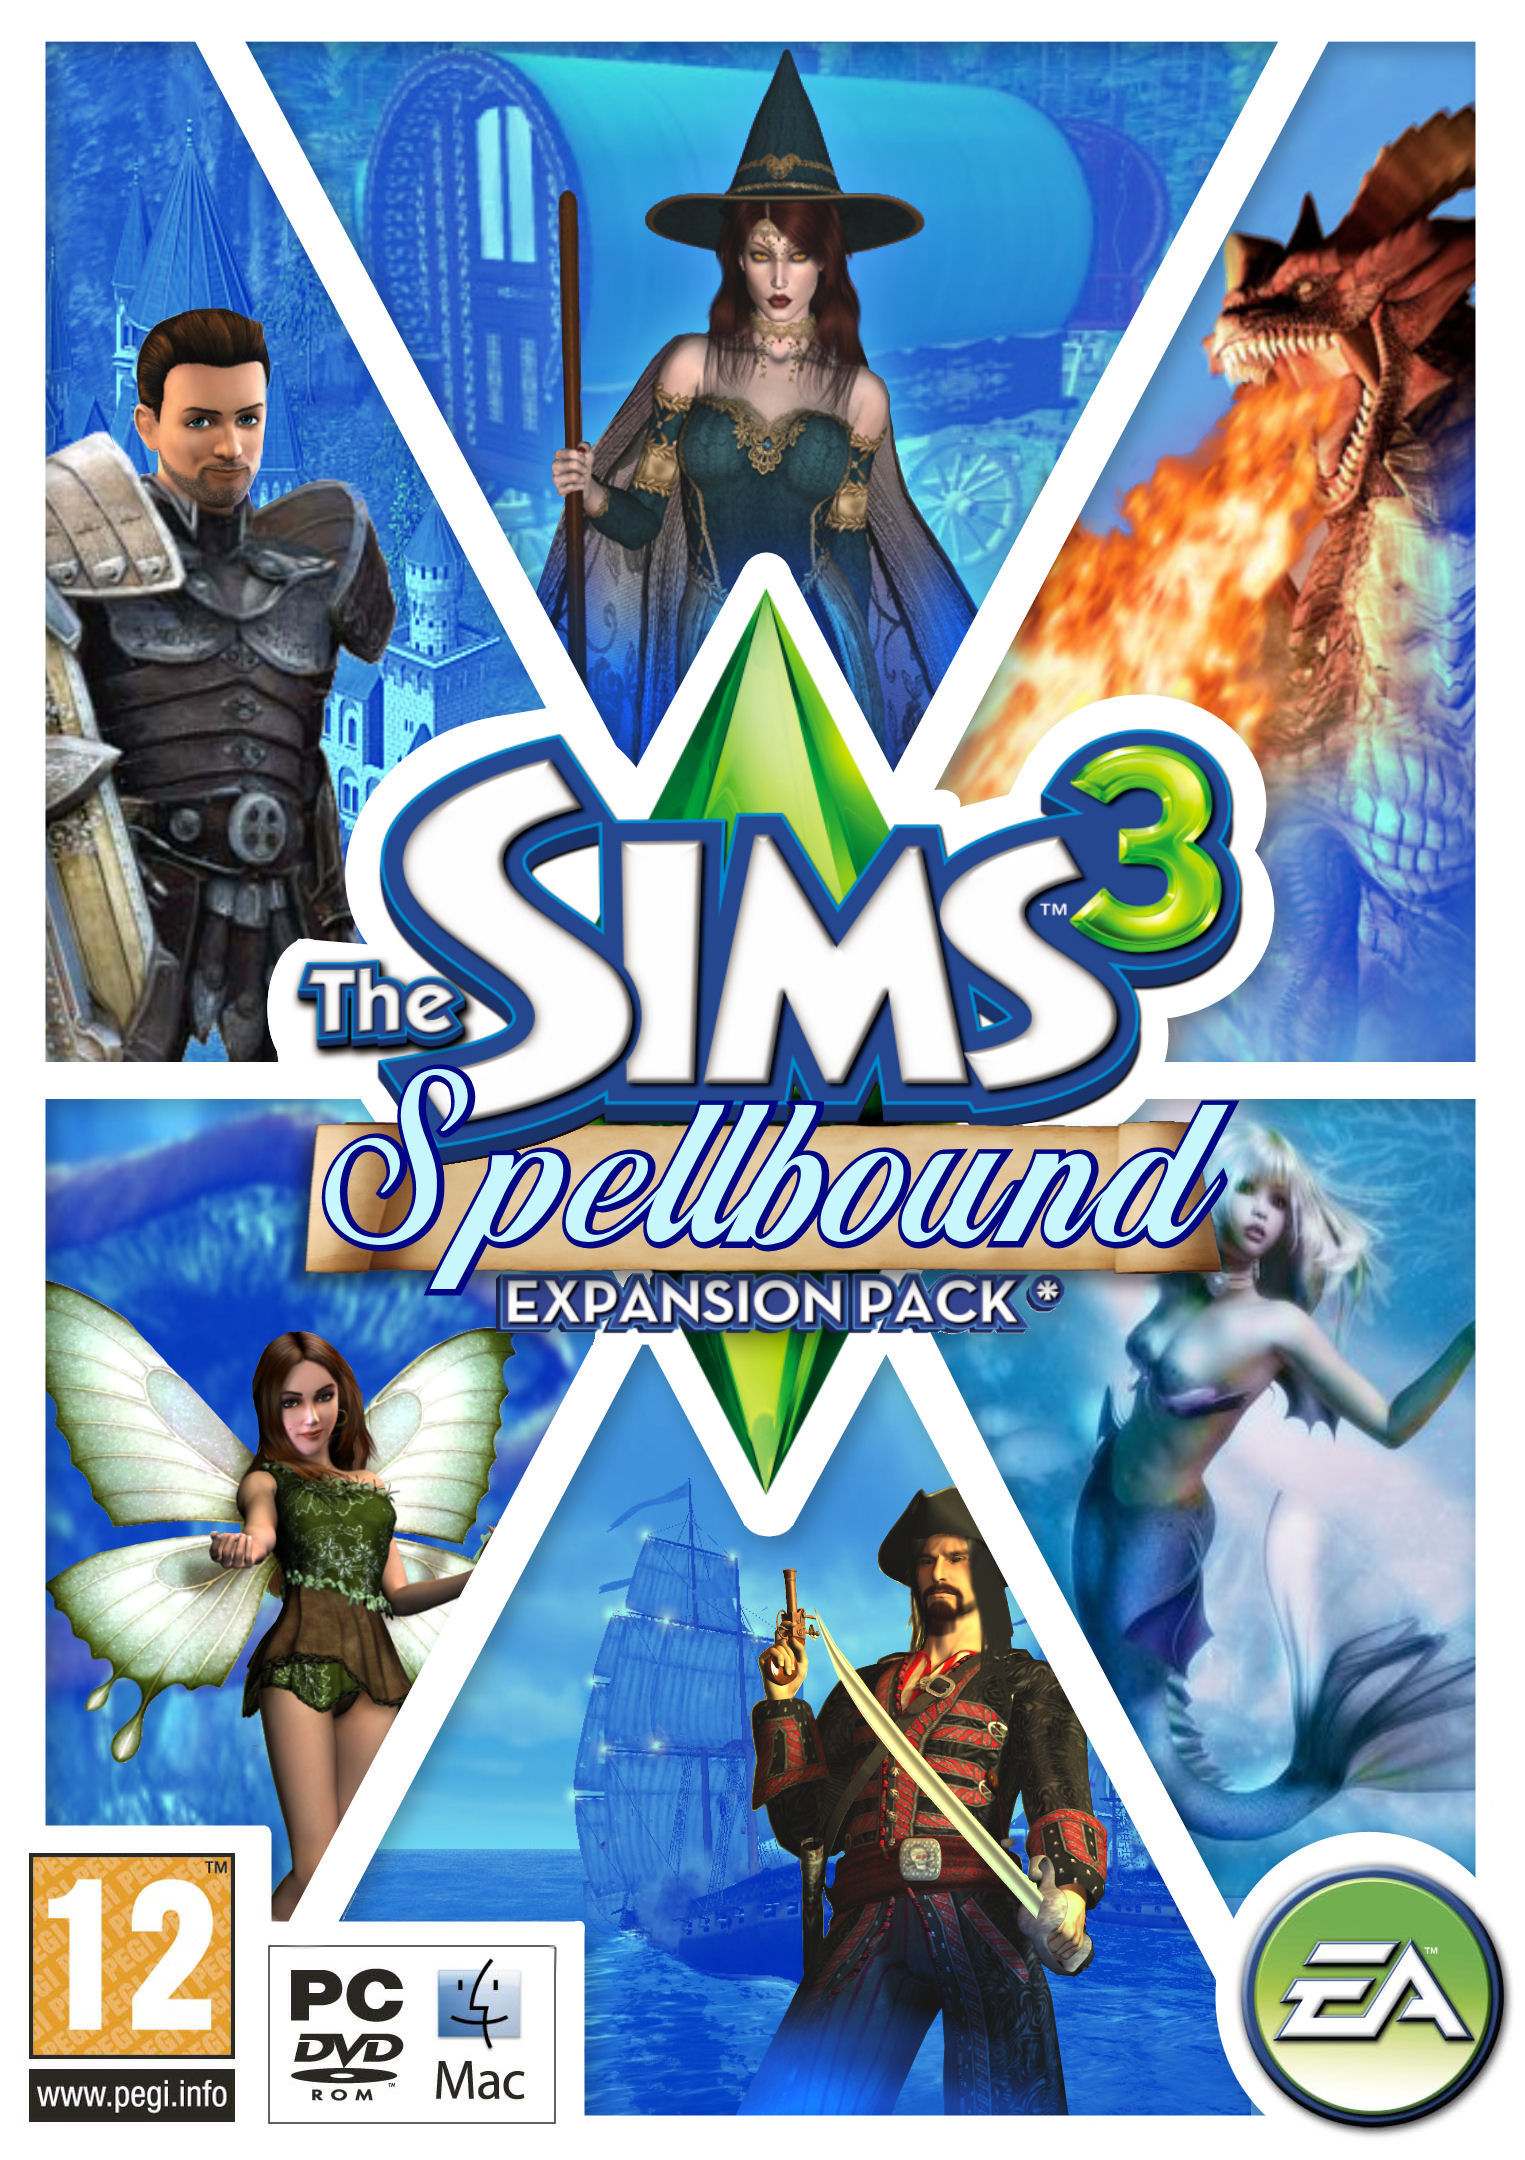 sims 4 free expansion packs download